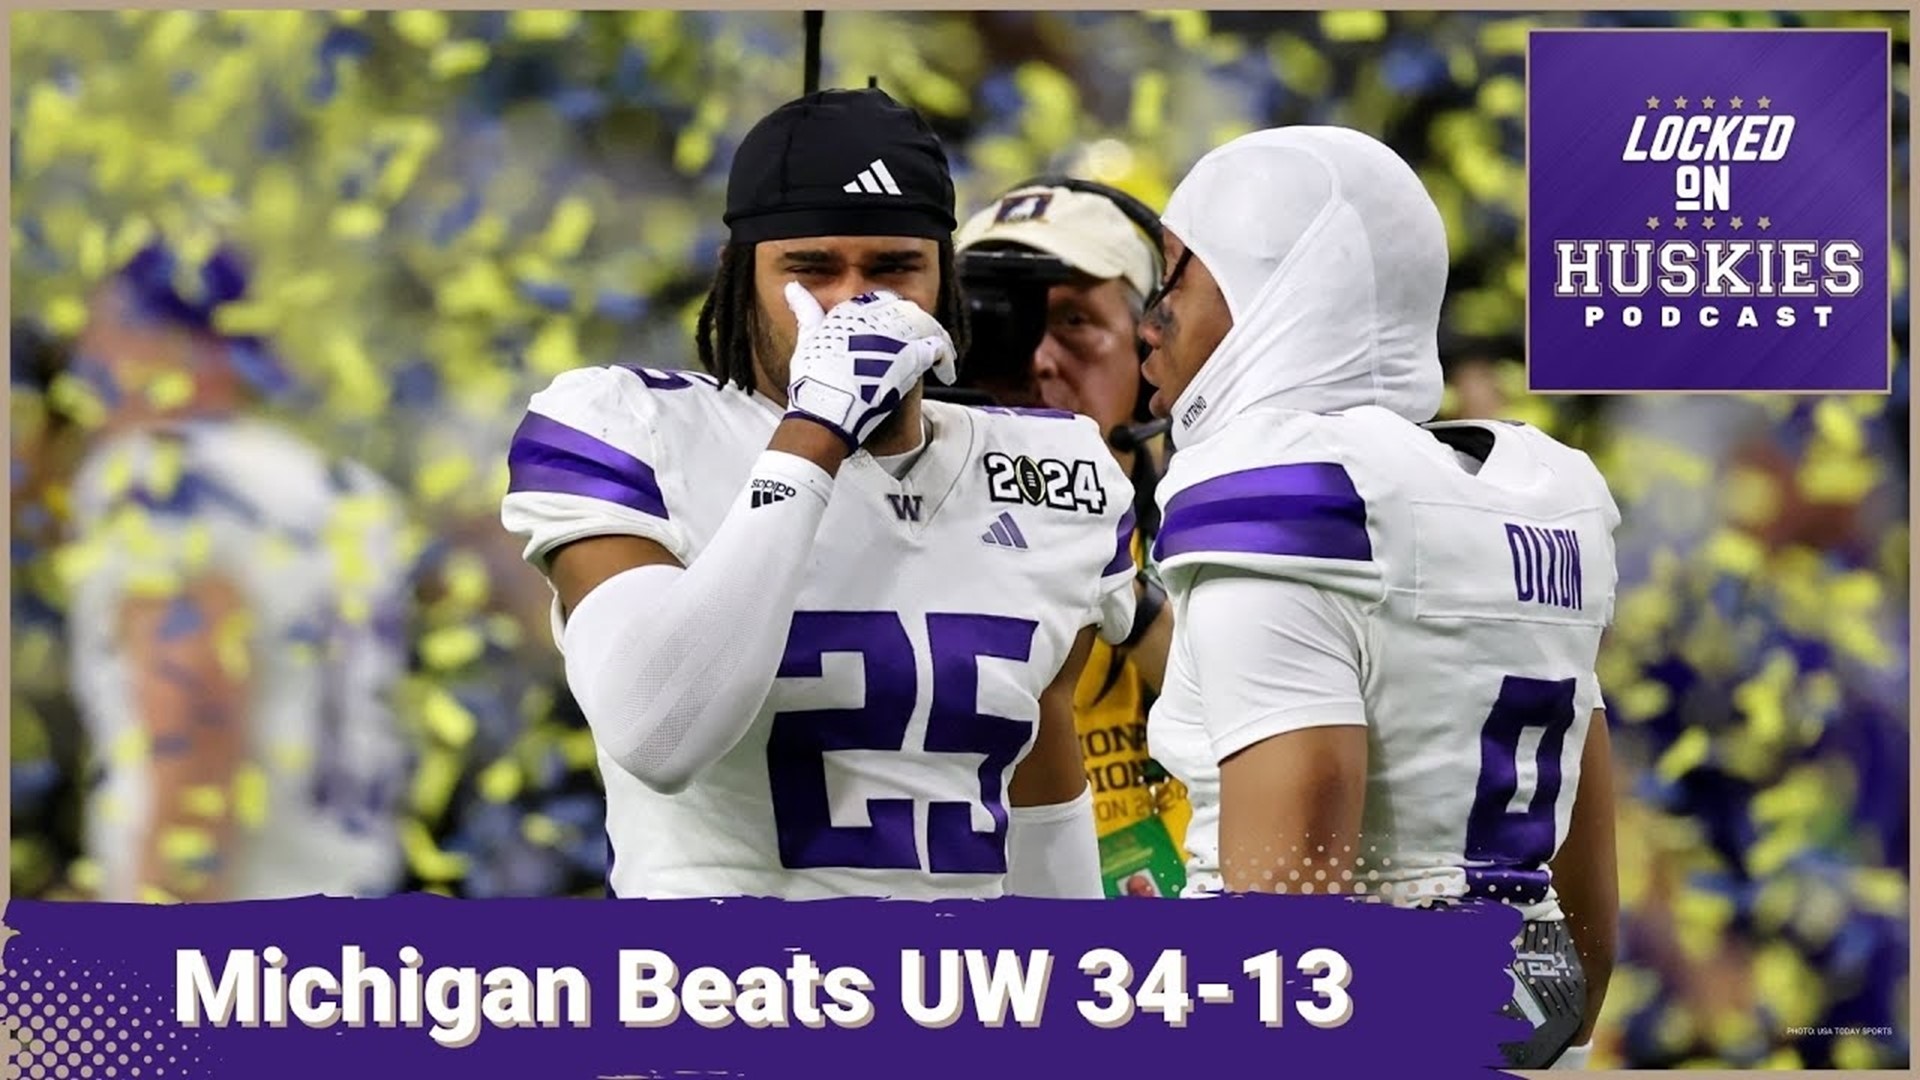 The Washington Huskies come up short in their quest to go undefeated, falling to Jim Harbaugh and the Michigan Wolverines in the national championship game.